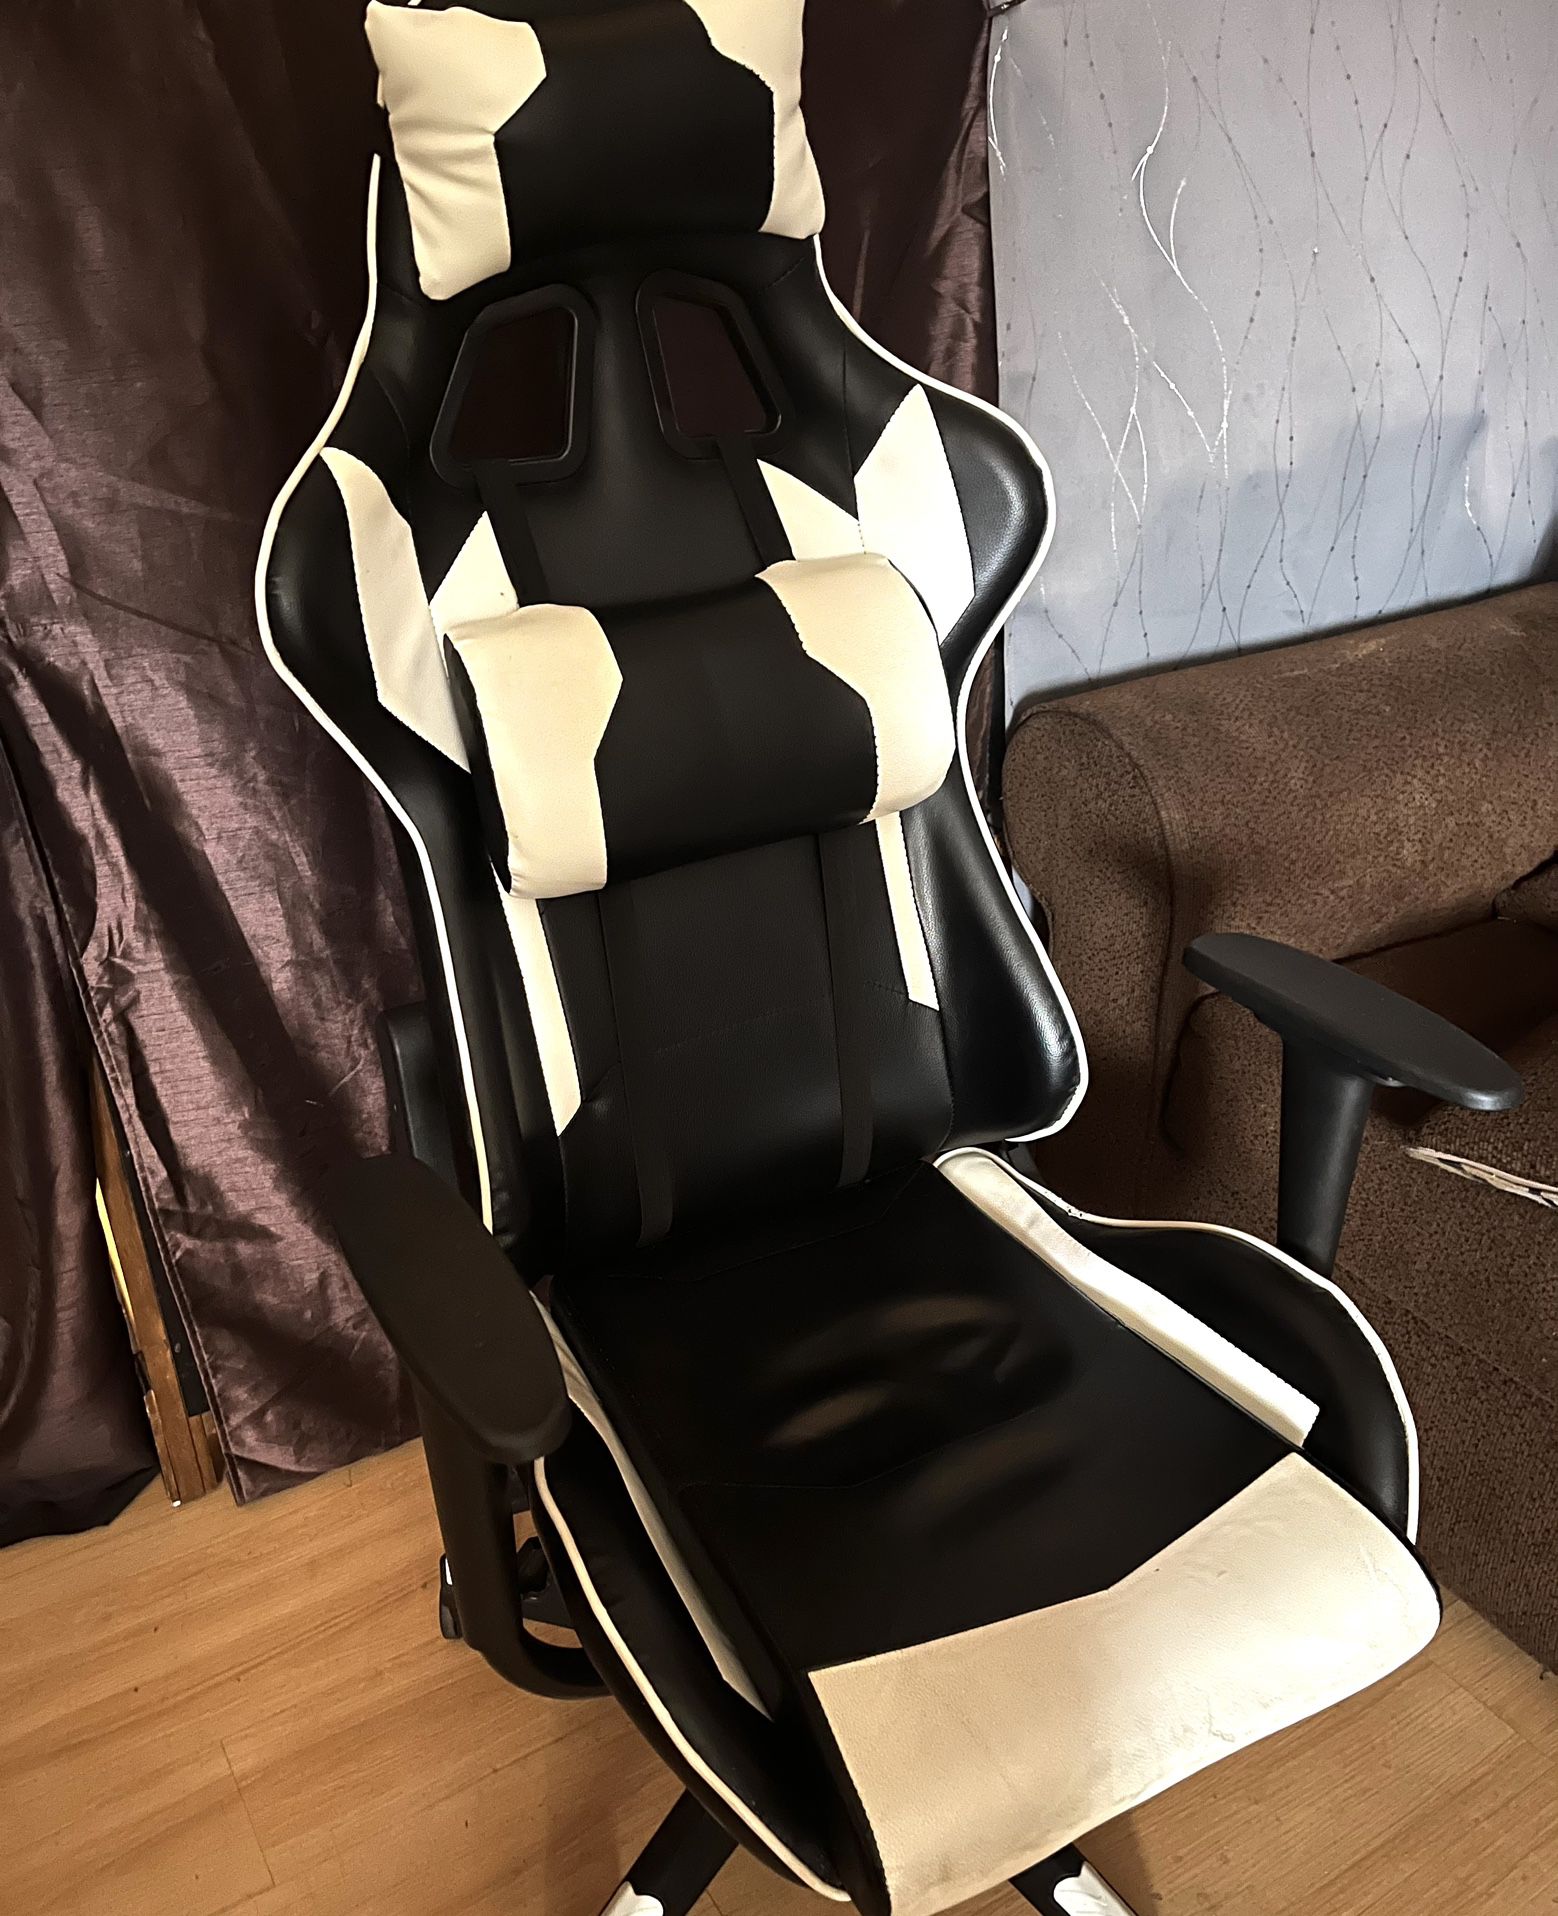 sracer - gaming chair 